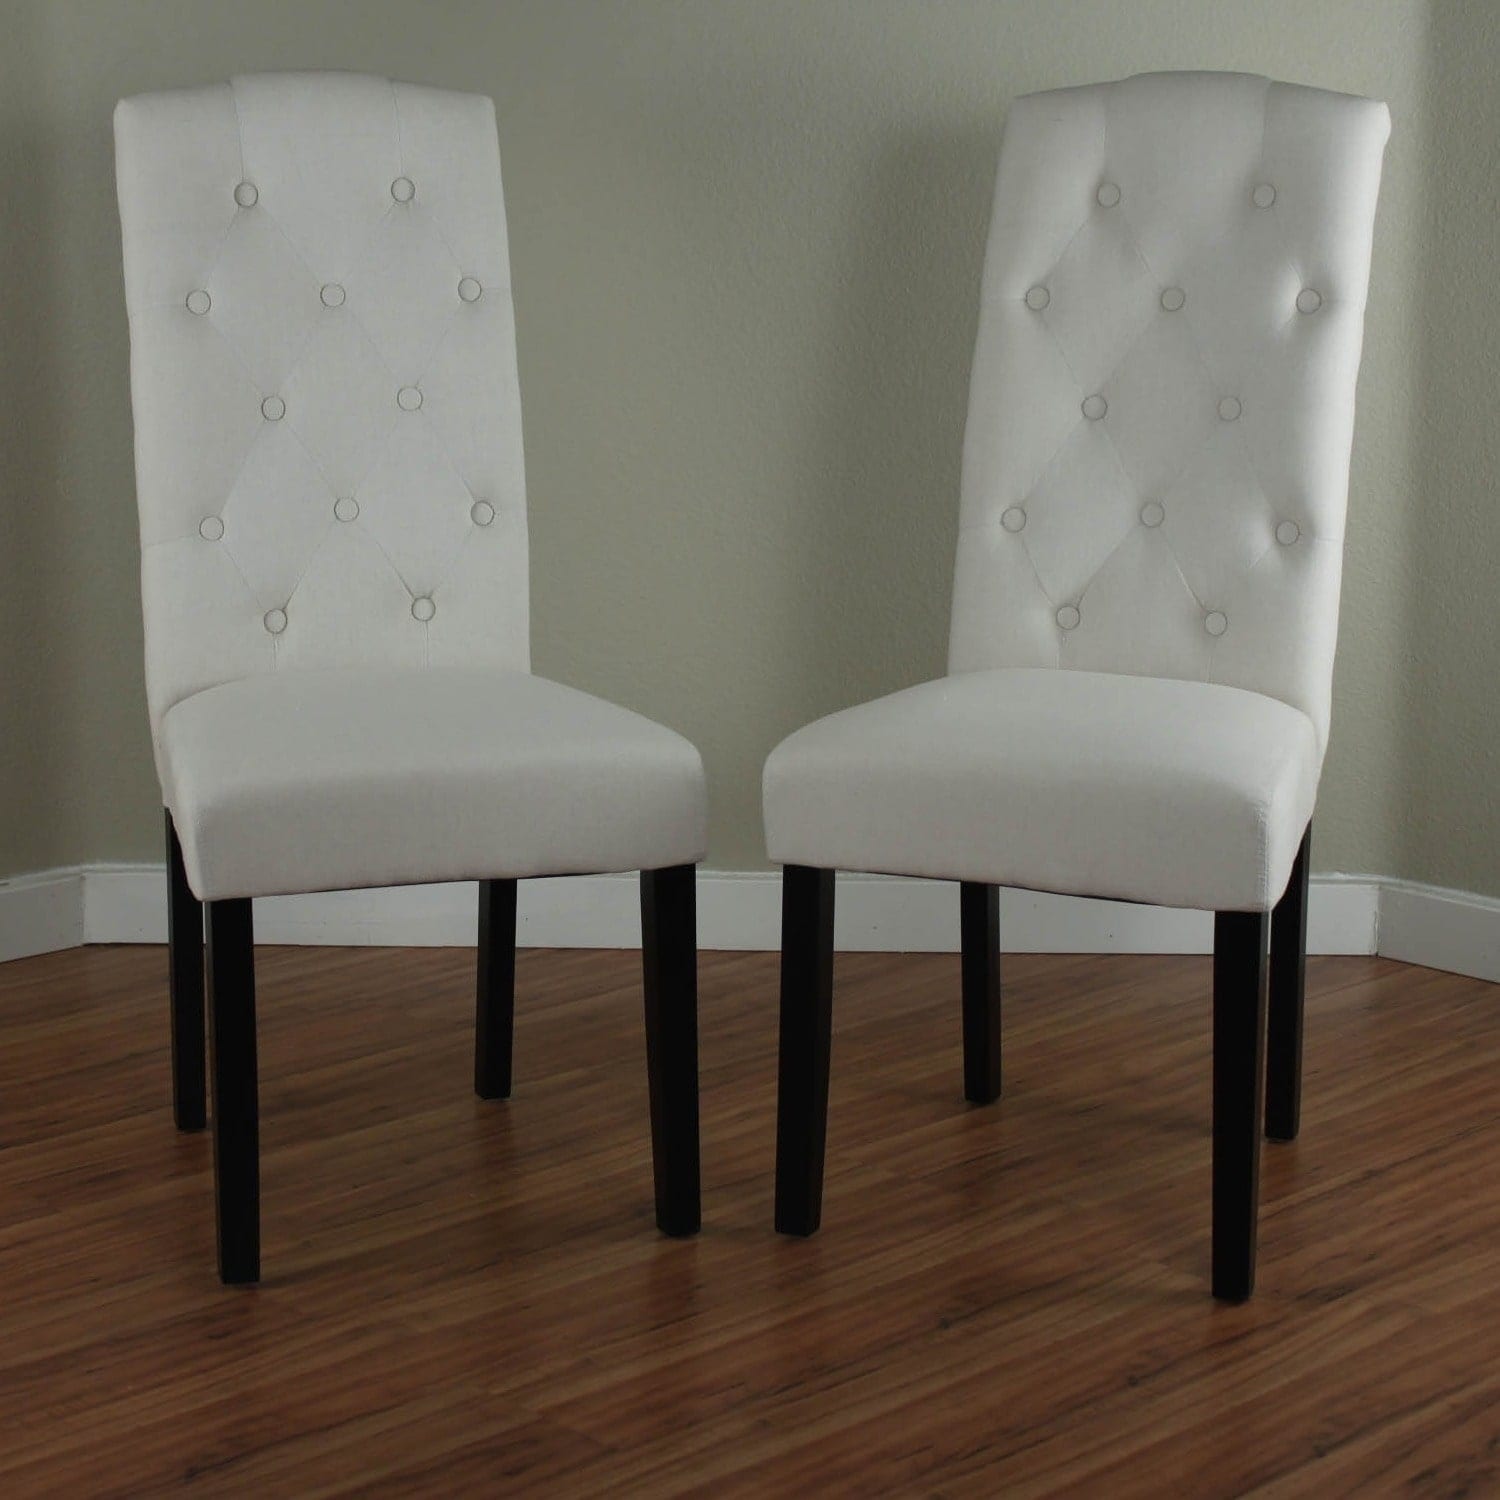 Wood Dining Chairs Buy Dining Room & Bar Furniture